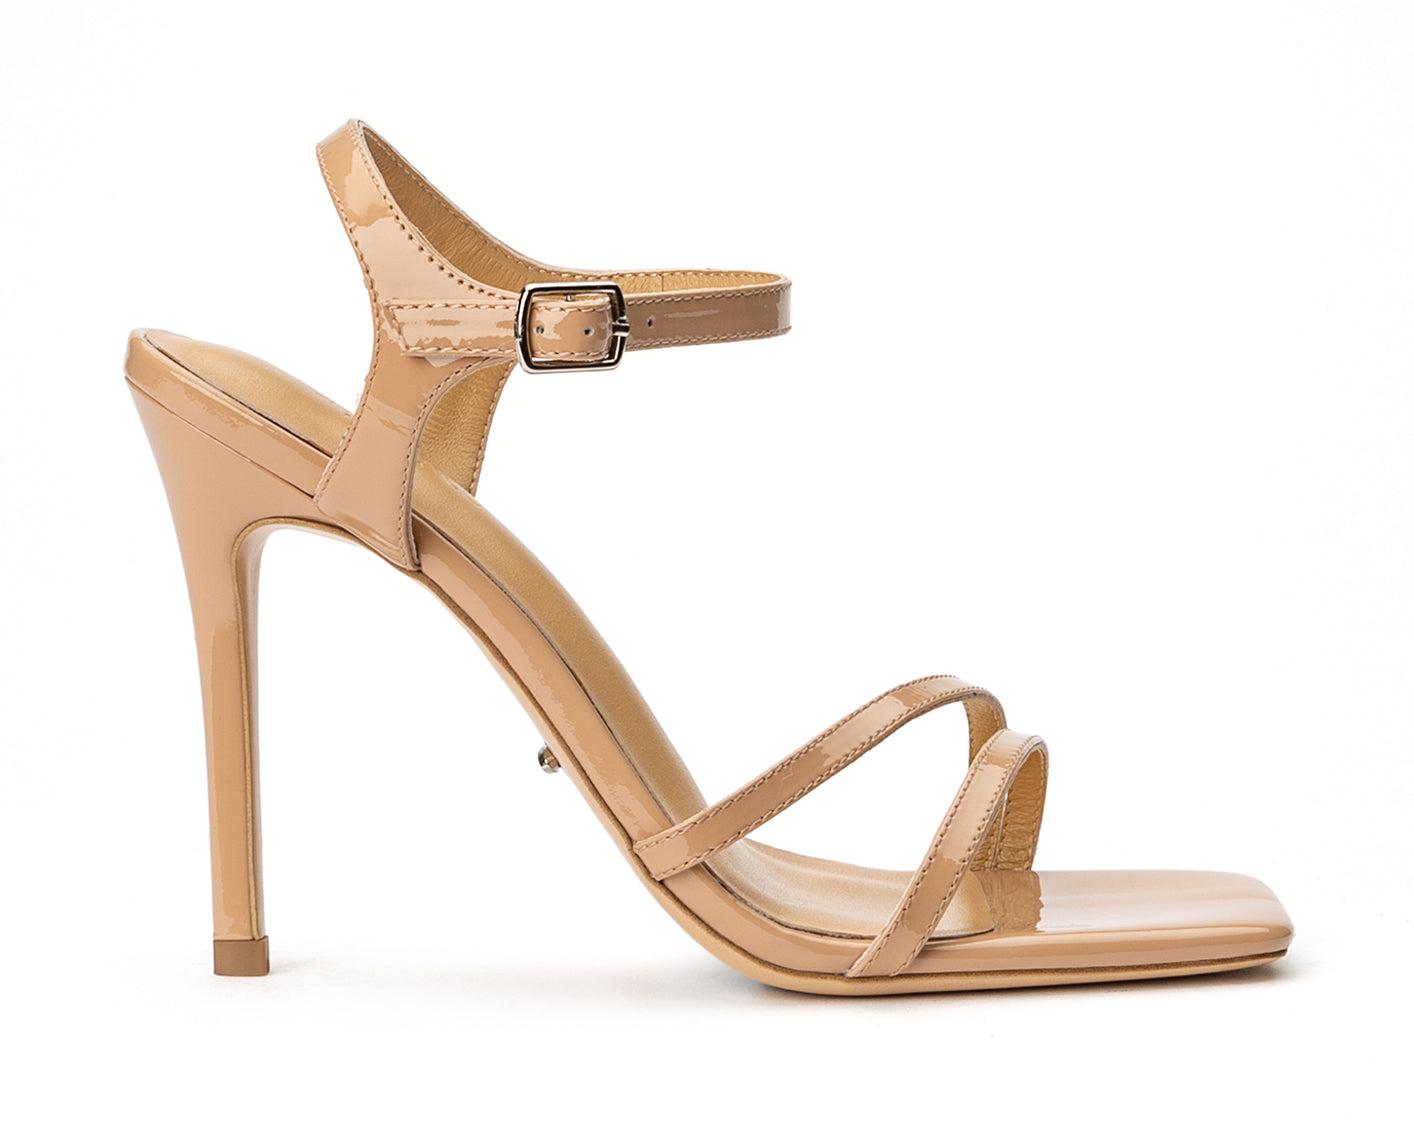 Tony Bianco Leather Florenz 10.5cm Heels in Nude Patent (Natural) | Lyst